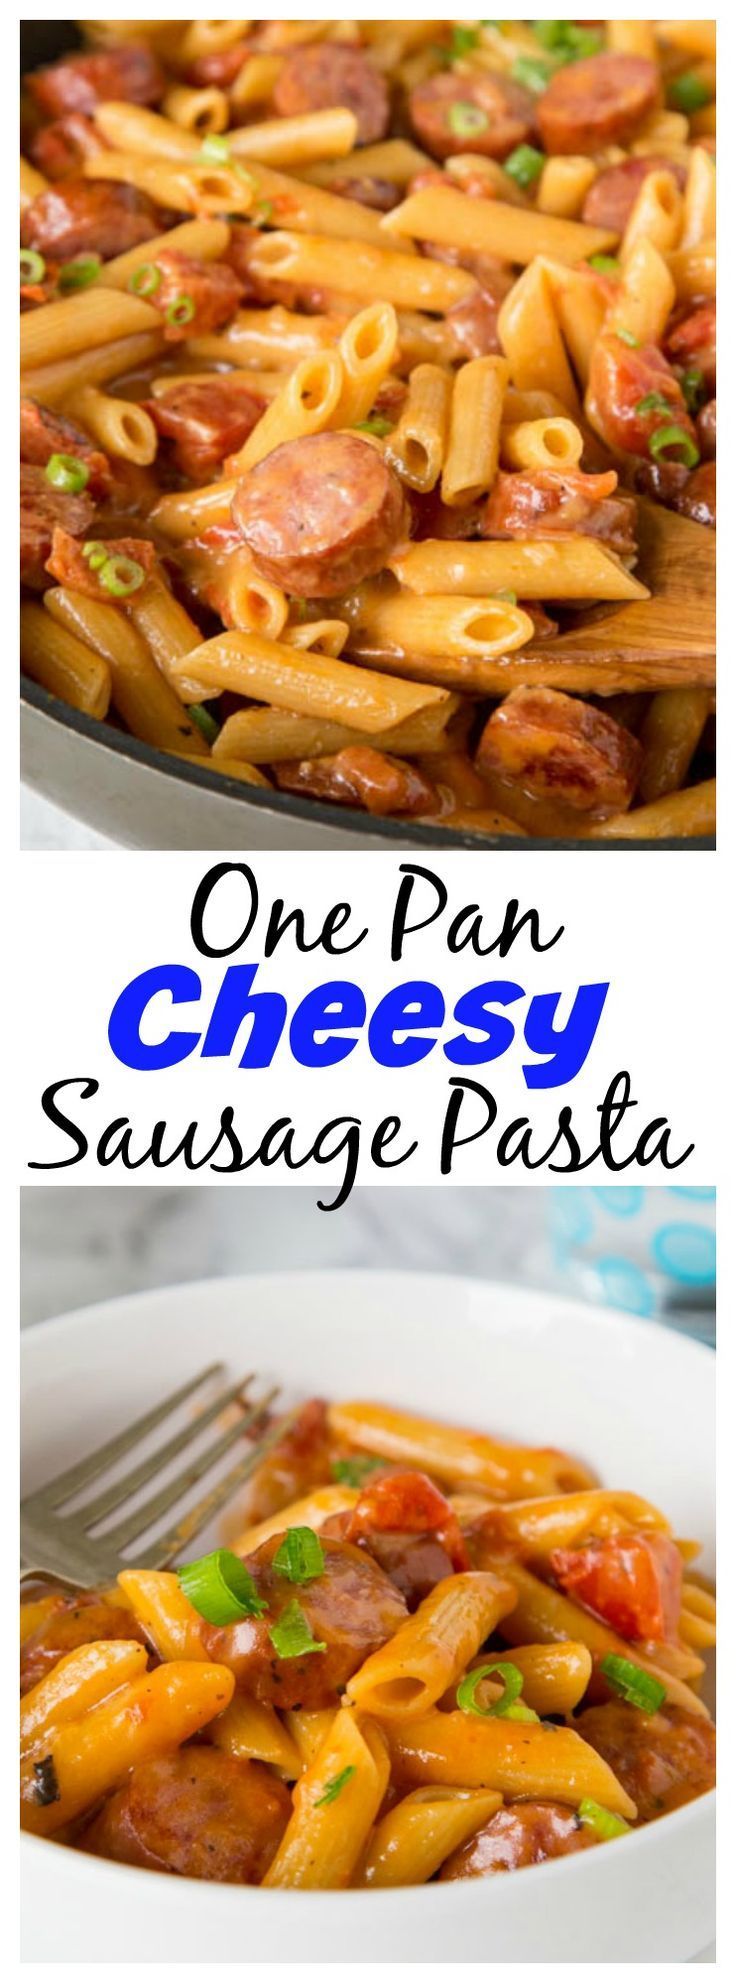 One Pan Cheesy Sausage Pasta – get dinner on the table with these easy pasta rec